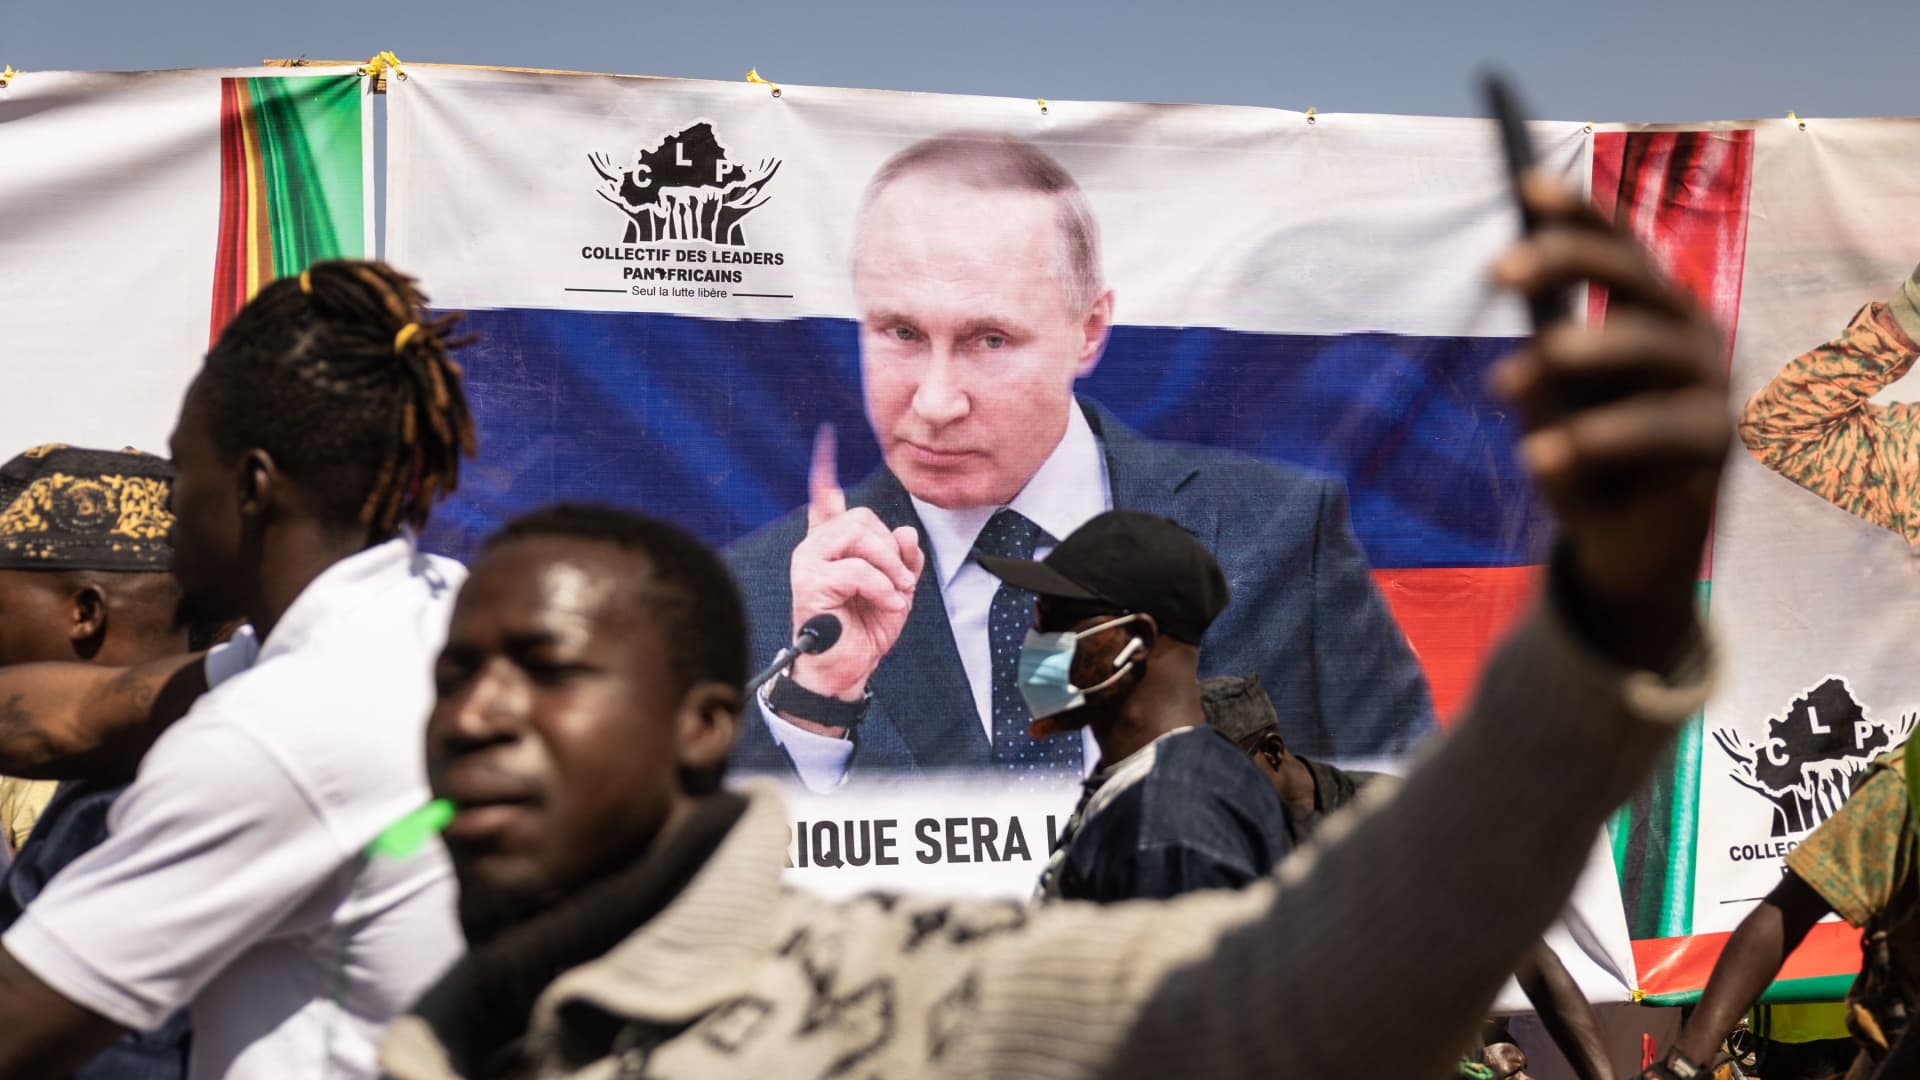 Russia offering African governments 'regime survival package' in exchange for resources, research says